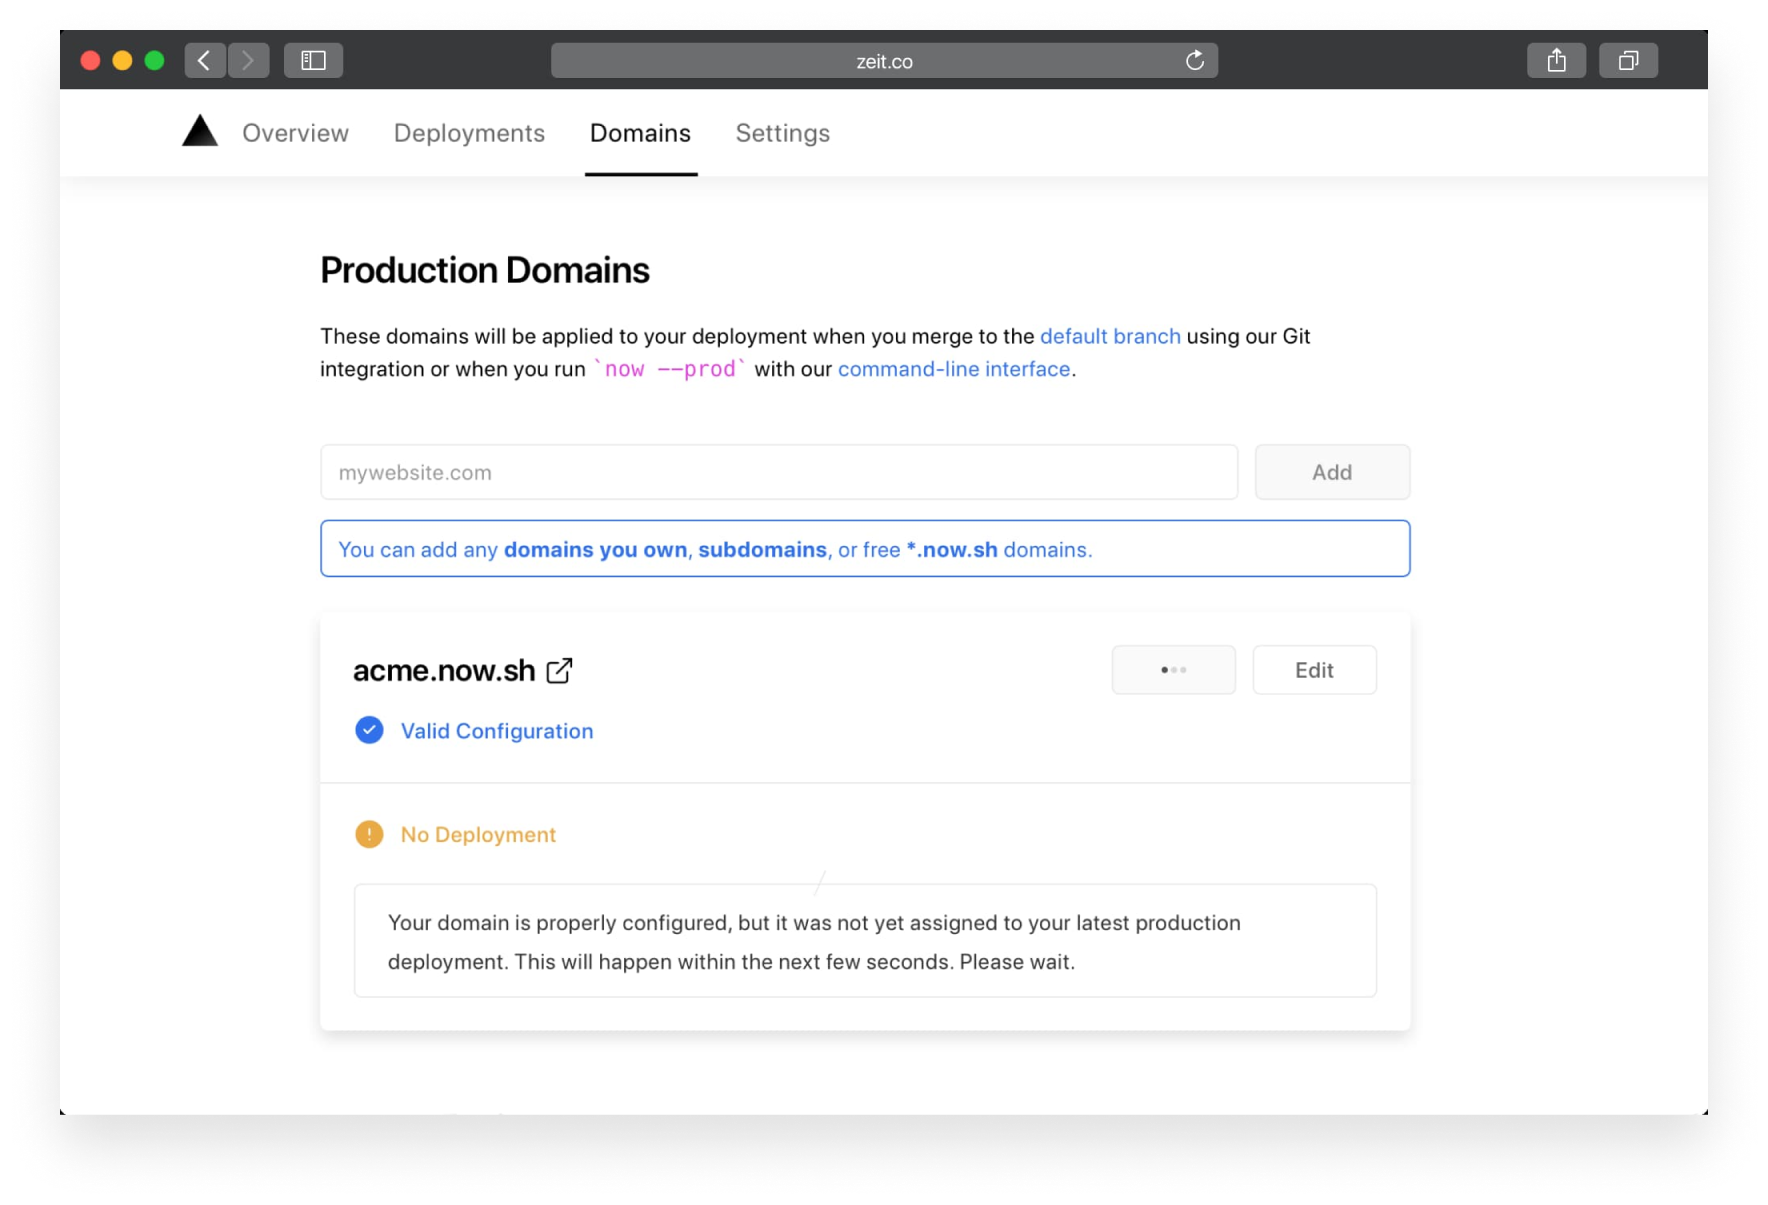 The interface guides you in setting up production domains for your project.